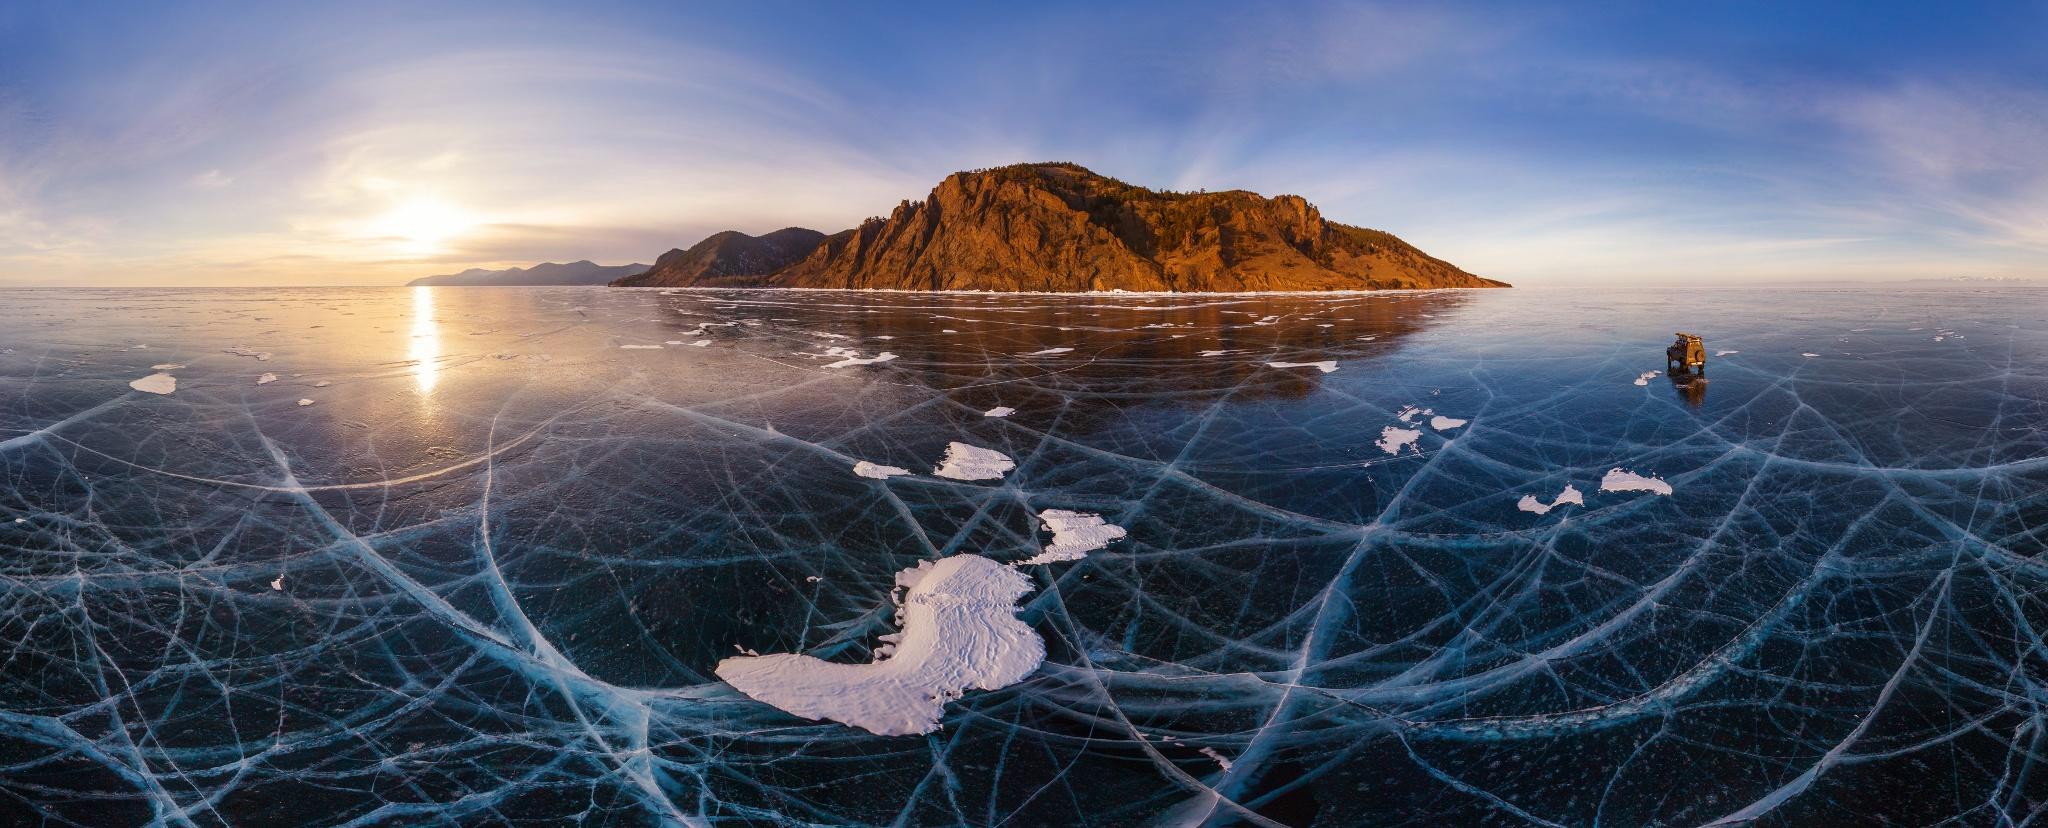 Baikal Lake in the evening